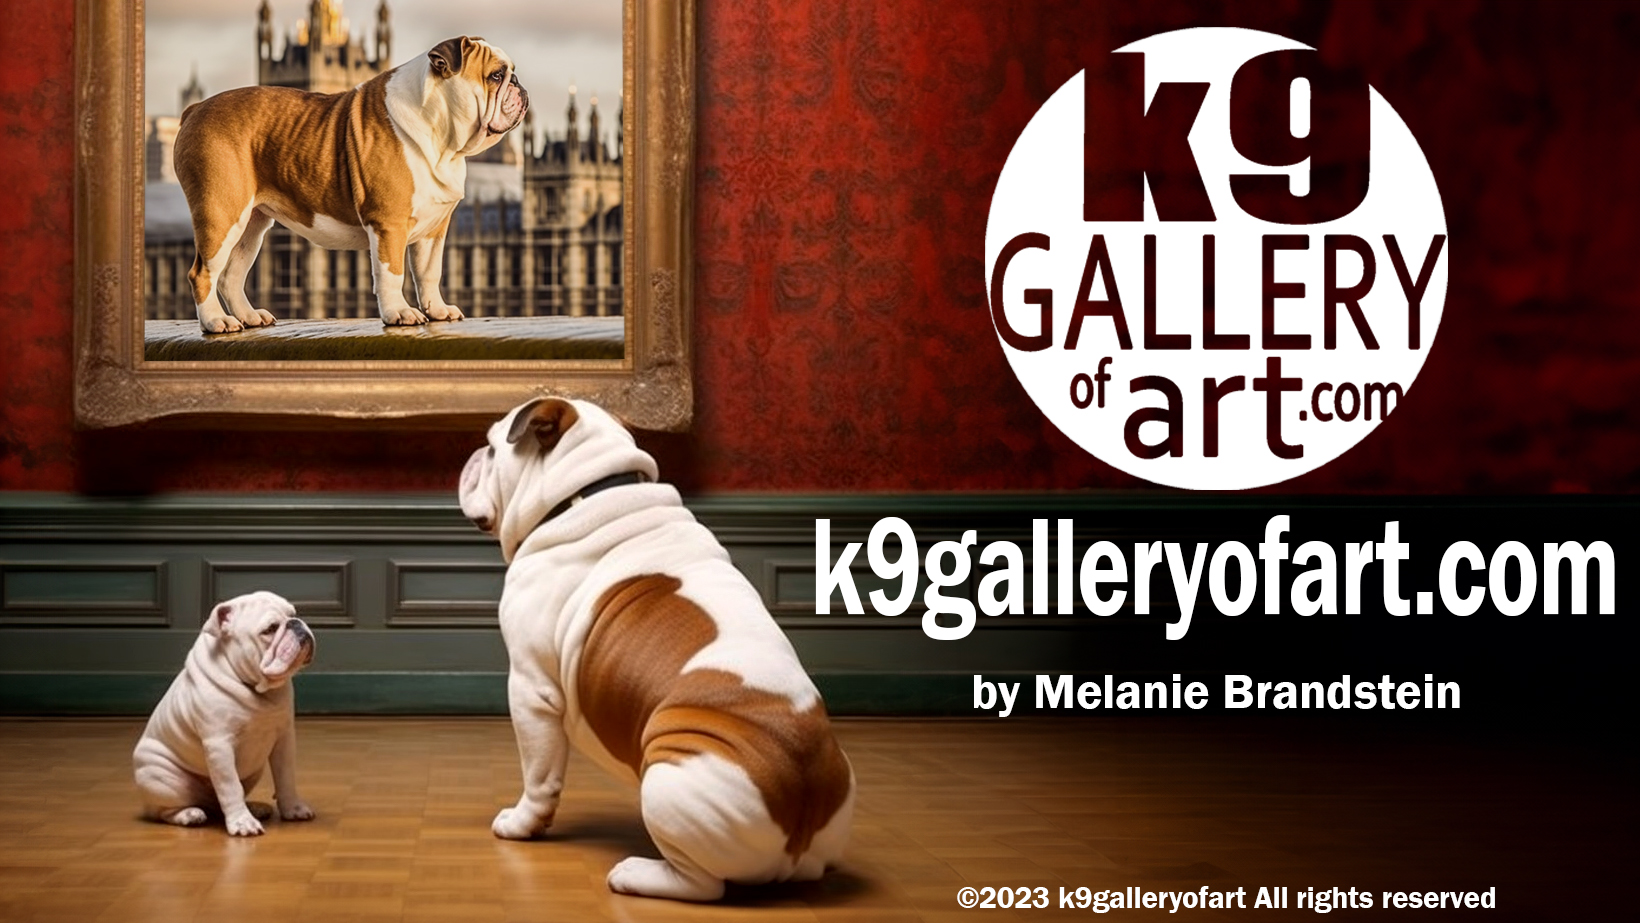 k9galleryofart.com advertisement with a parrot gossiping to a golden retriever saying Have You Heard?